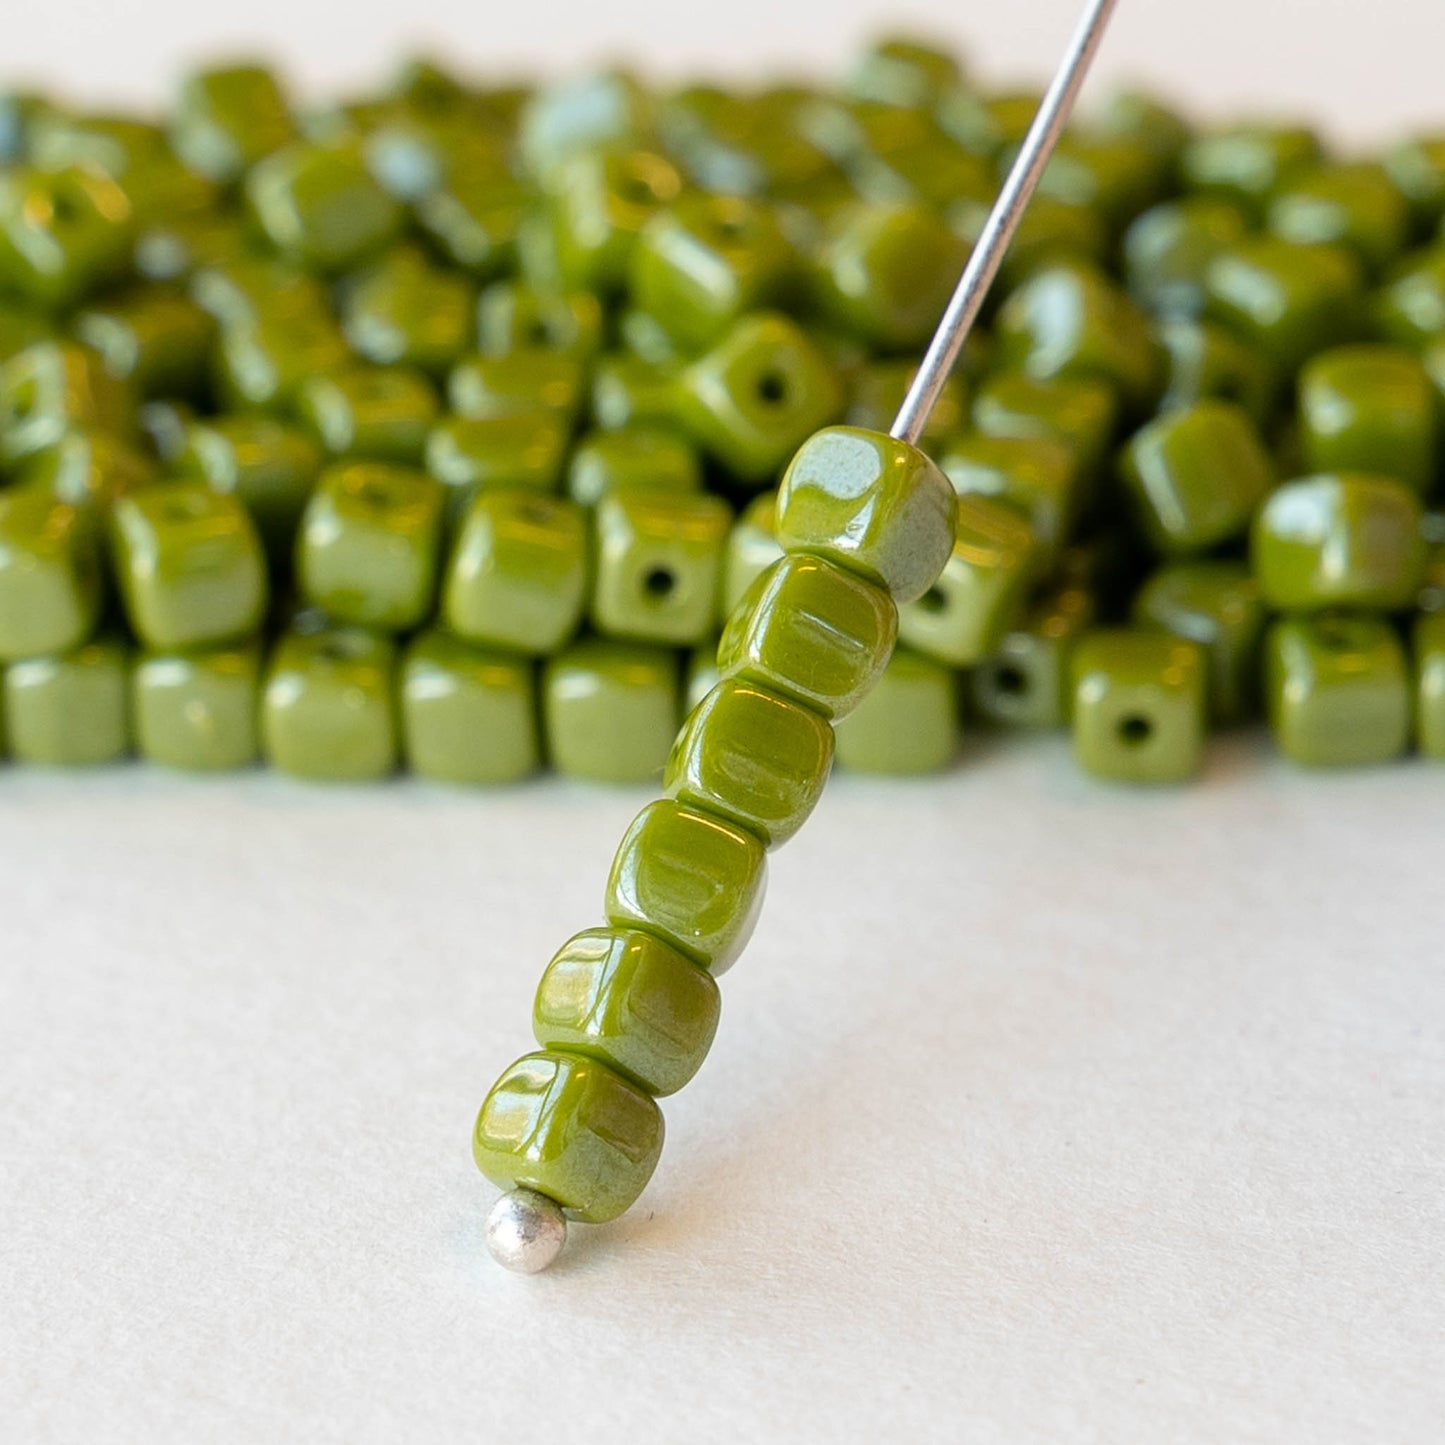 4mm Glass Cube Beads - Olive Green Luster - 100 beads